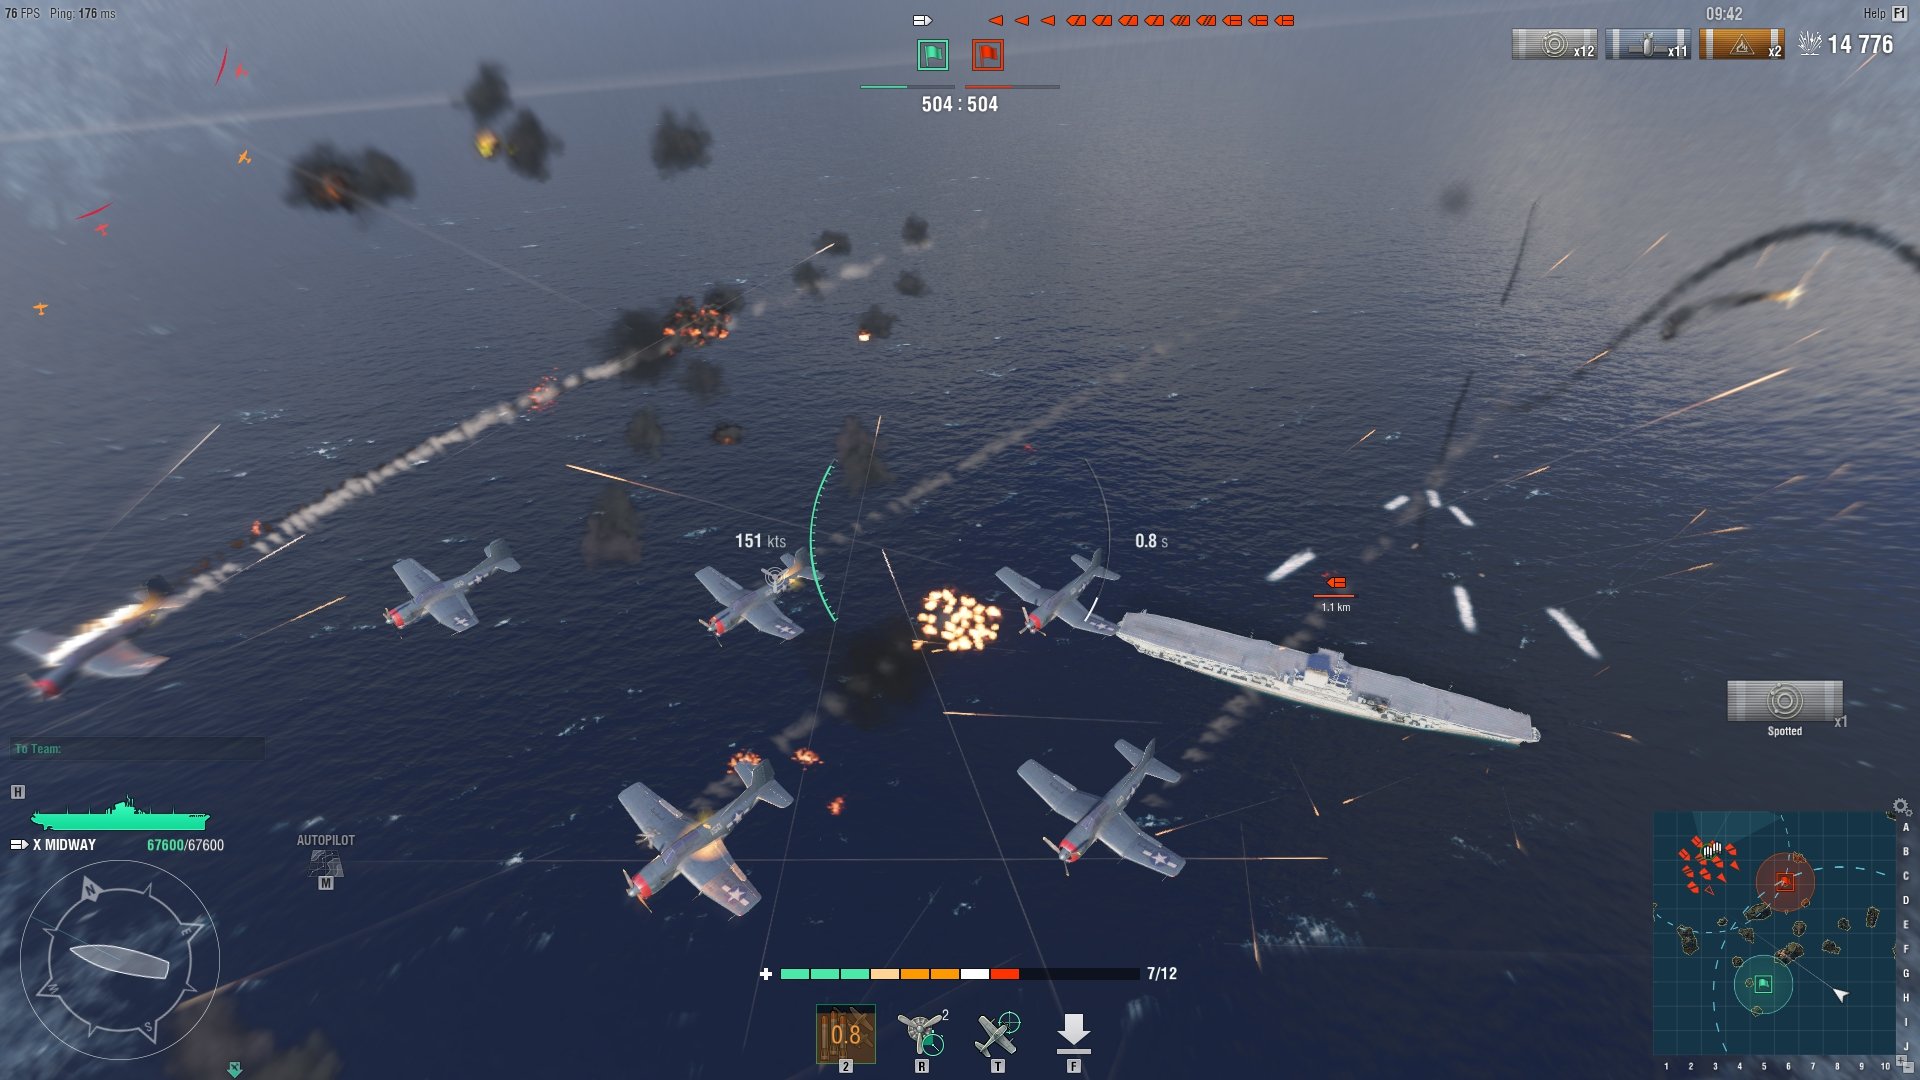 Wows 壁紙 Pc Android Iphoneの壁紙画像 Anihonetwall